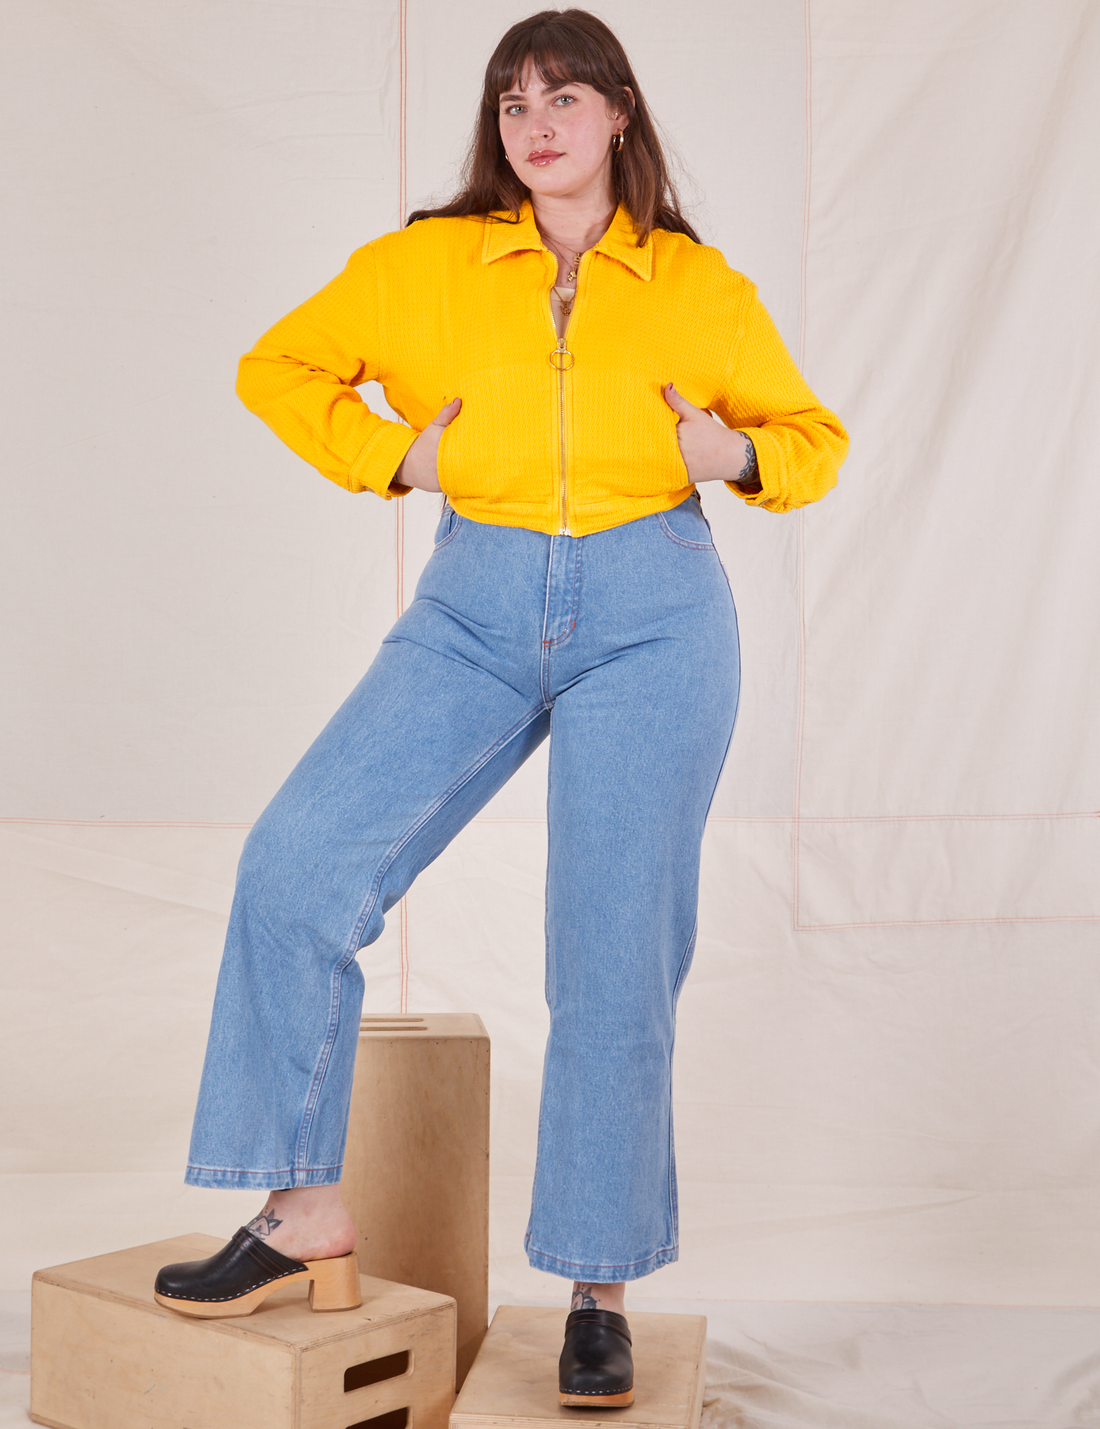 Sydney is 5'9" and wearing XS Ricky Jacket in Sunshine Yellow with both hands in the pockets